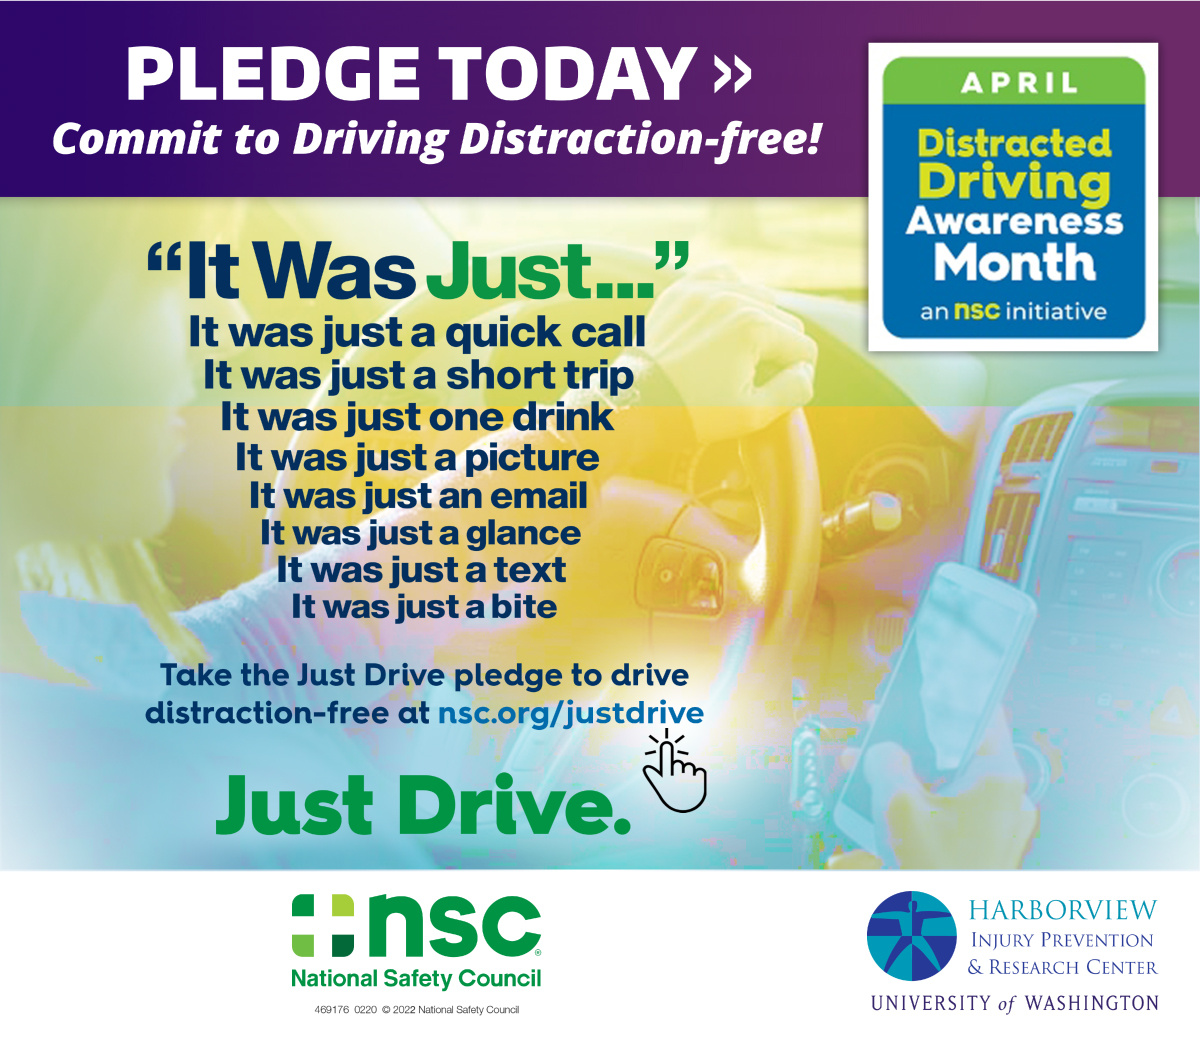 Keep your eyes on the road and distractions at bay! Friendly reminder as April is Distracted Driving Awareness Month – let's make a pledge to drive distraction free. You can help make every journey safe and focused. #DriveFocused #DDAM #ItsInOurHands hiprc.org/distracted-dri…